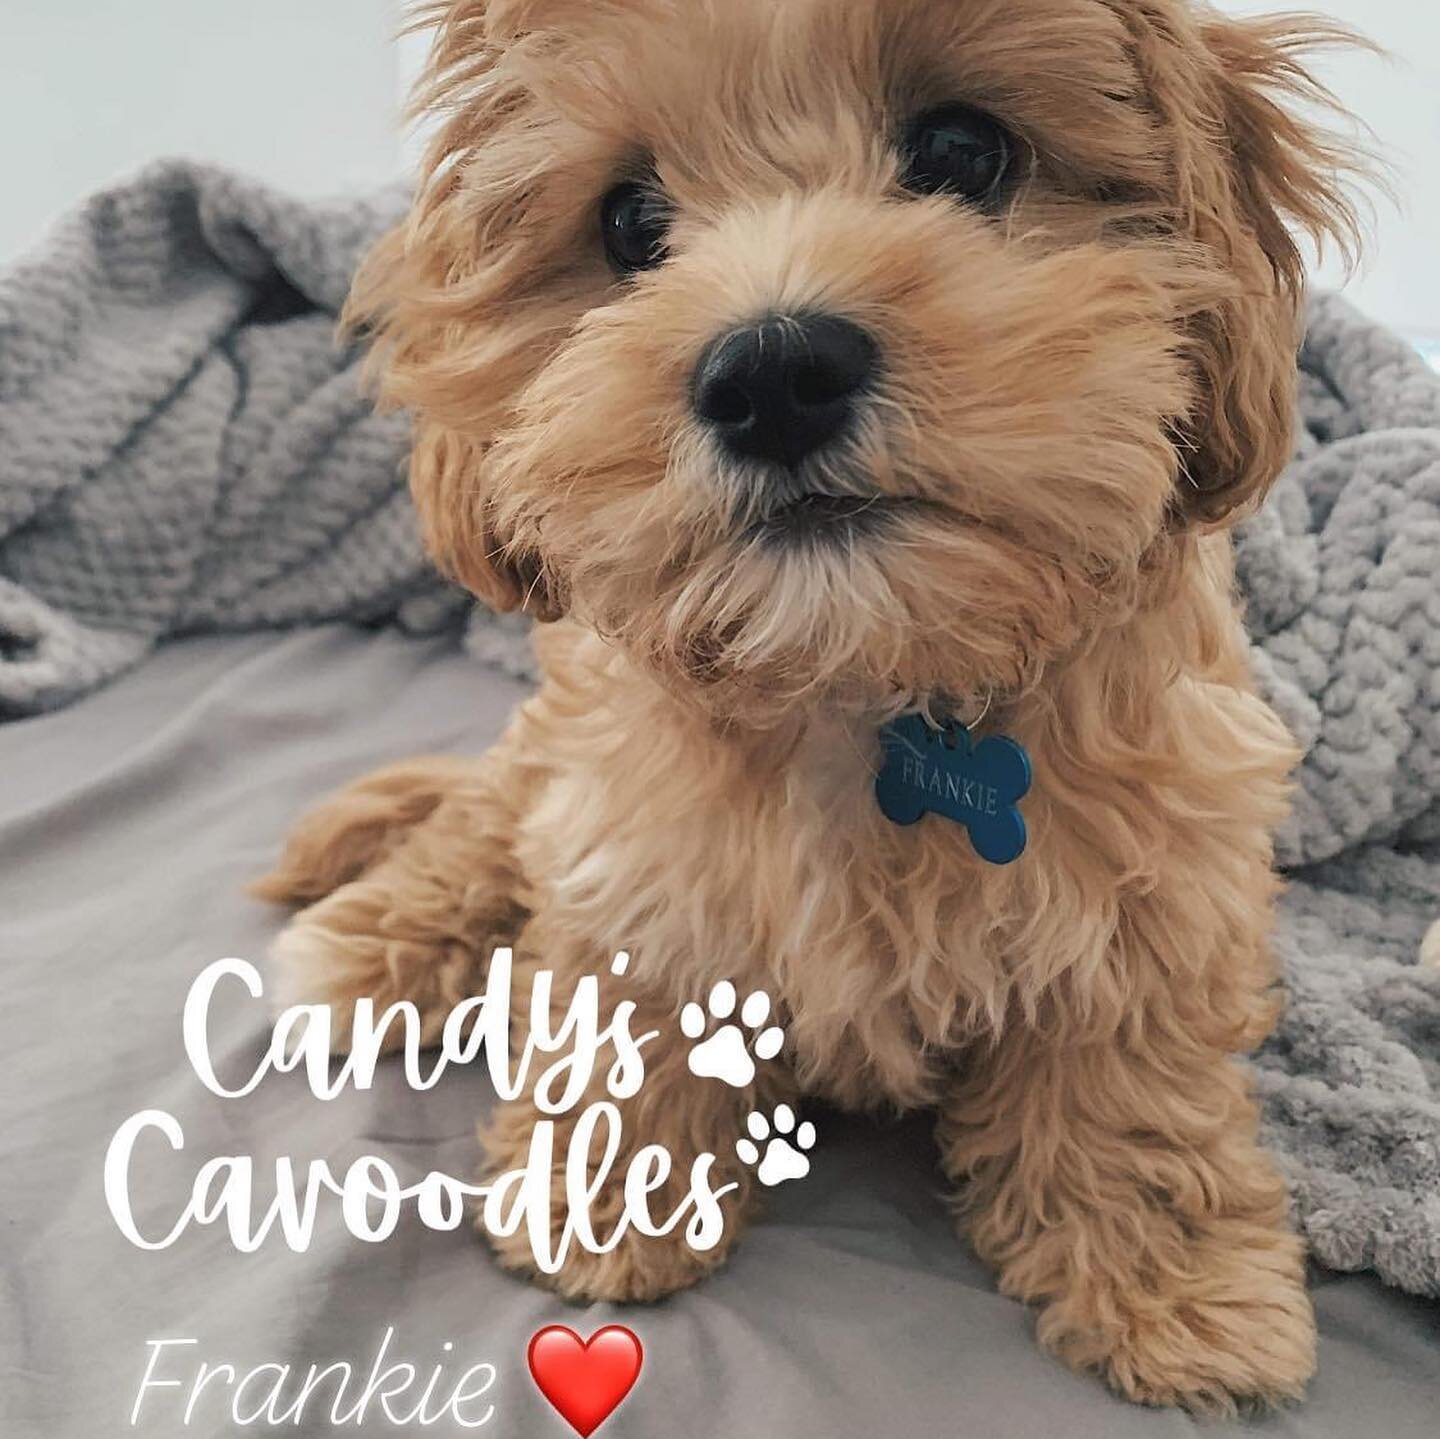 Flashback to Frankie ❤️happy birthday! He is two years old.